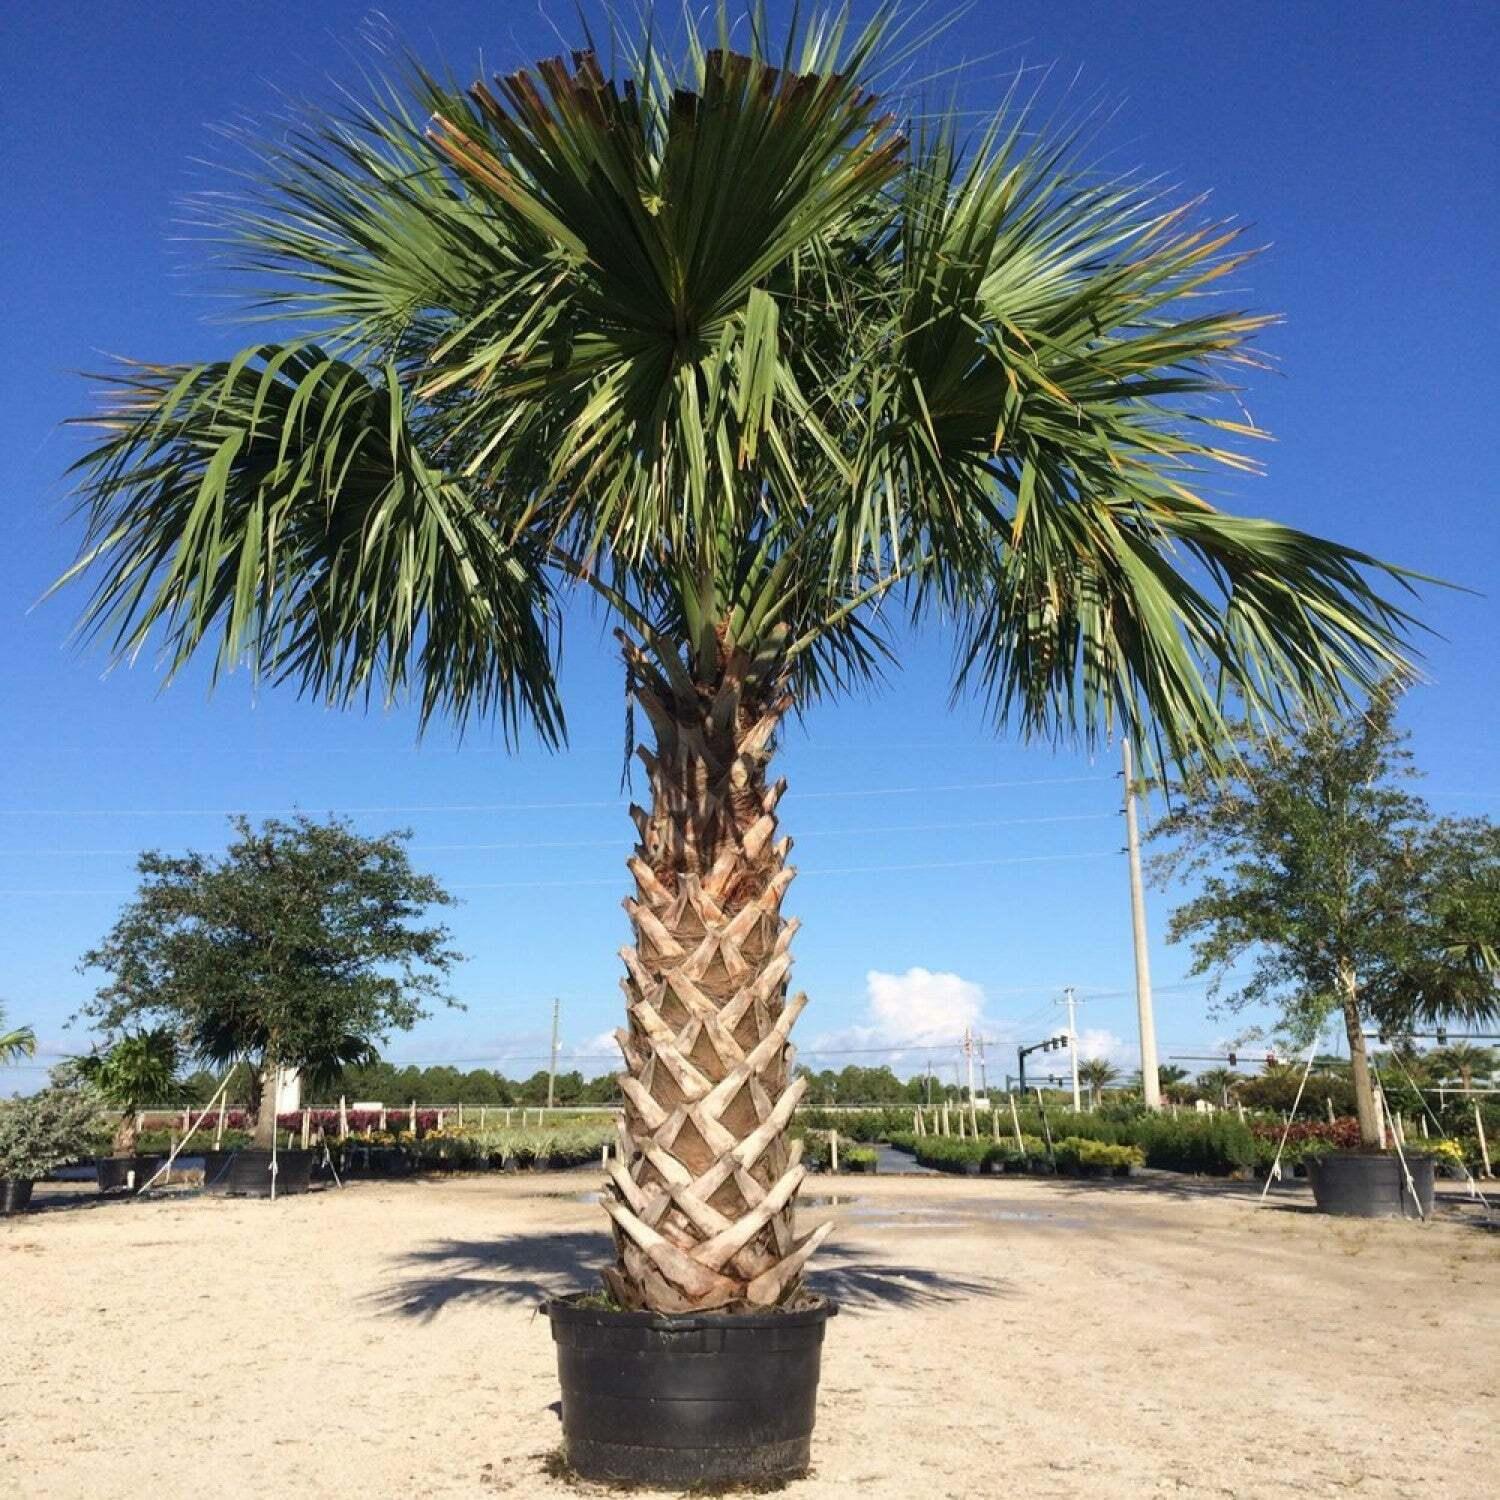 10 Cabbage Palm Trees - 5-7" Tall - 6 Month Old Live Plants - Sabal palmetto - The Nursery Center